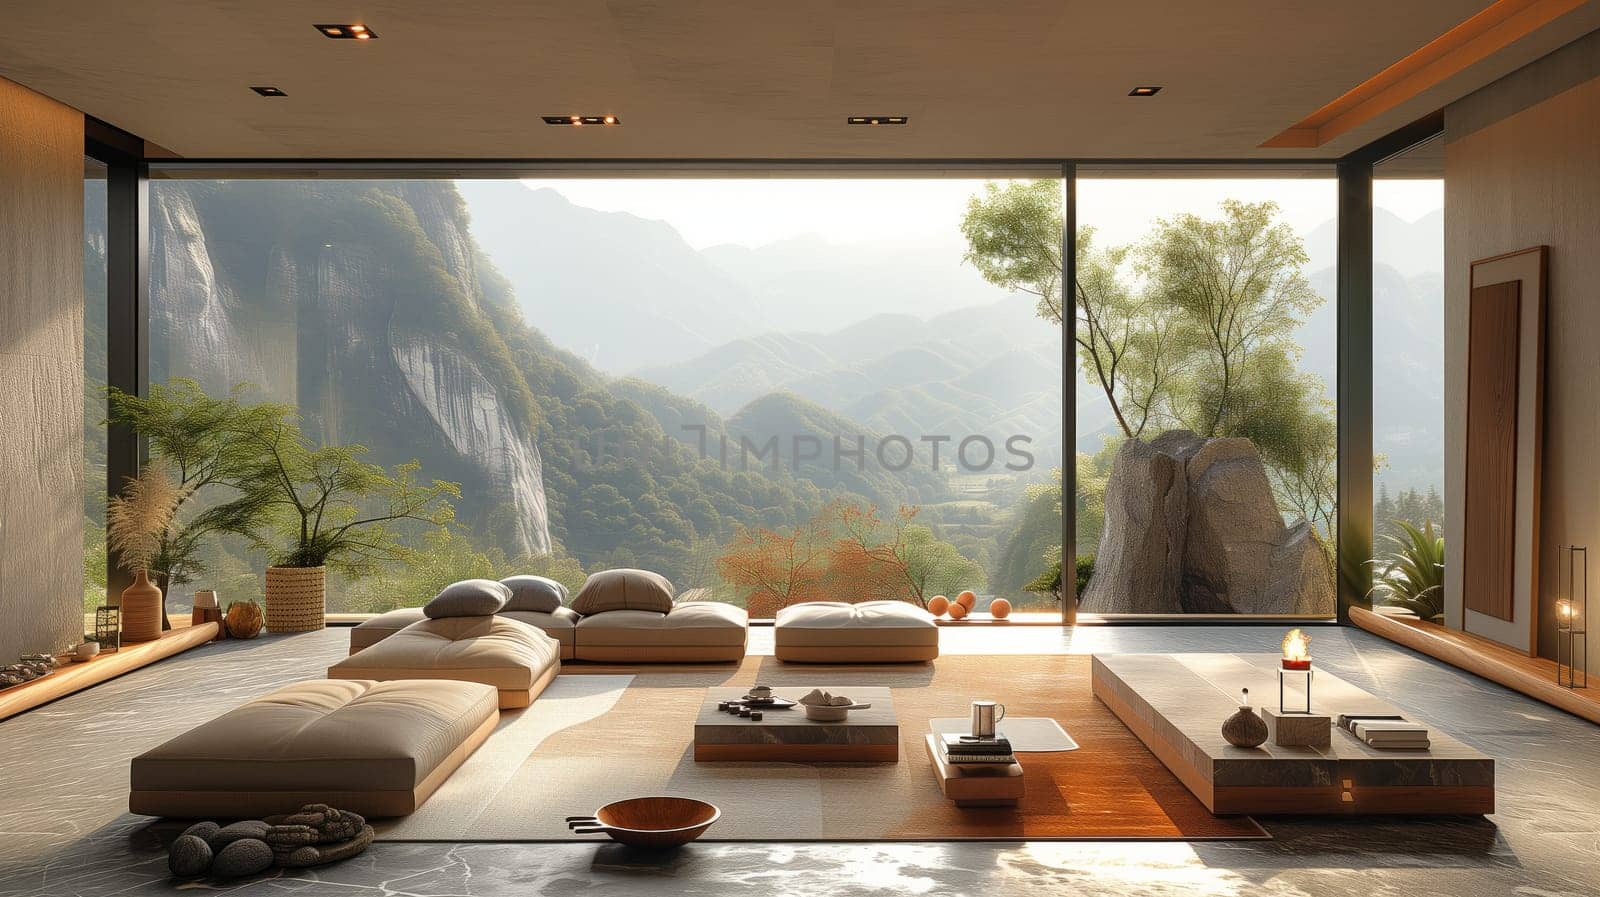 Living room with mountain view through large window by richwolf